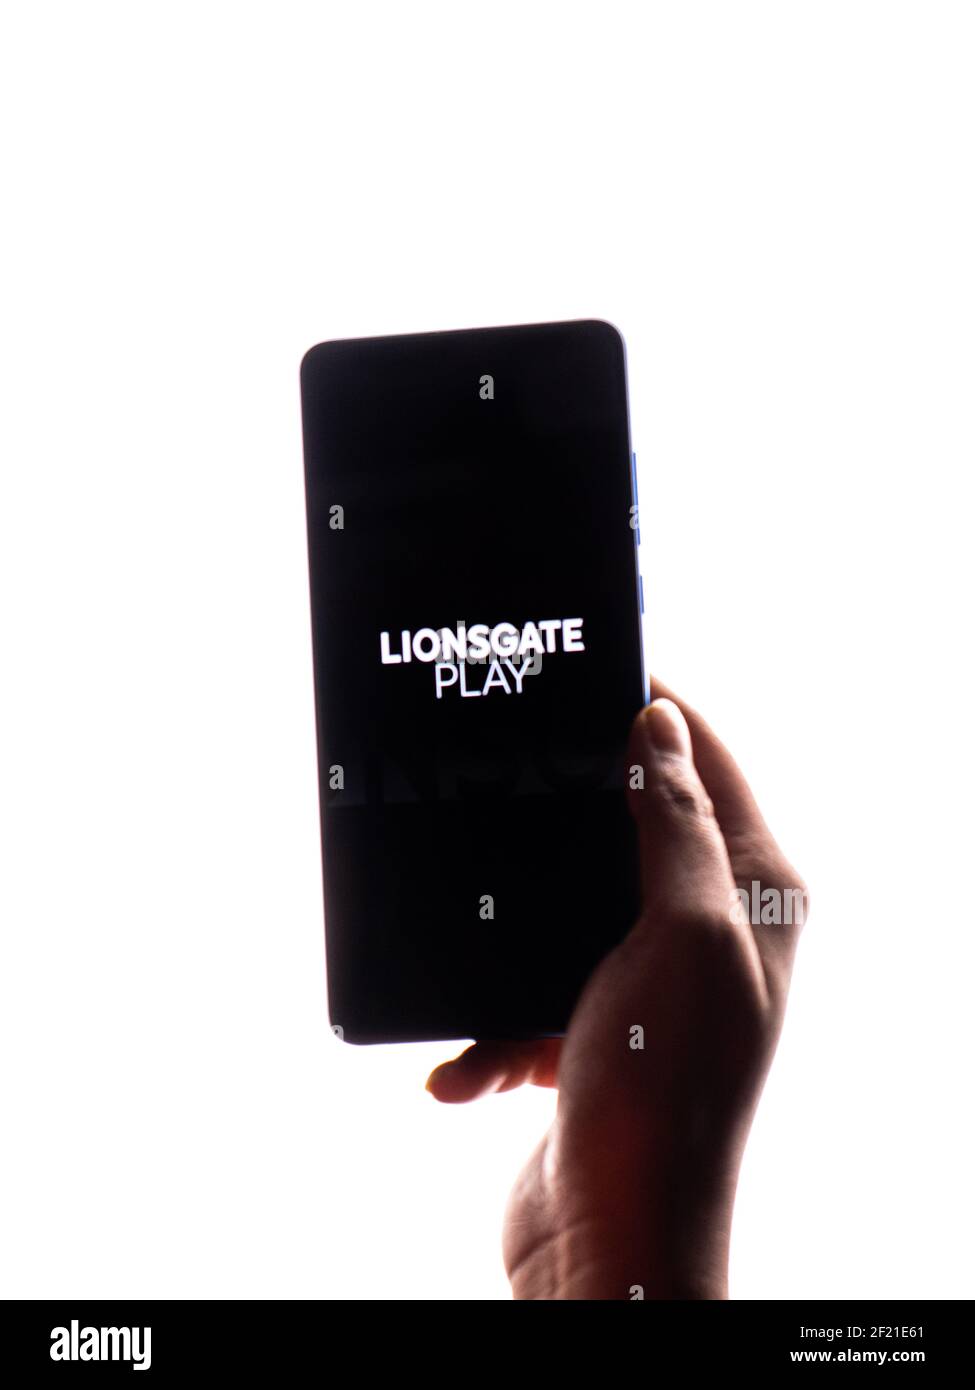 Assam, india - March 10, 2021 : Lionsgate Play logo on phone screen stock image. Stock Photo